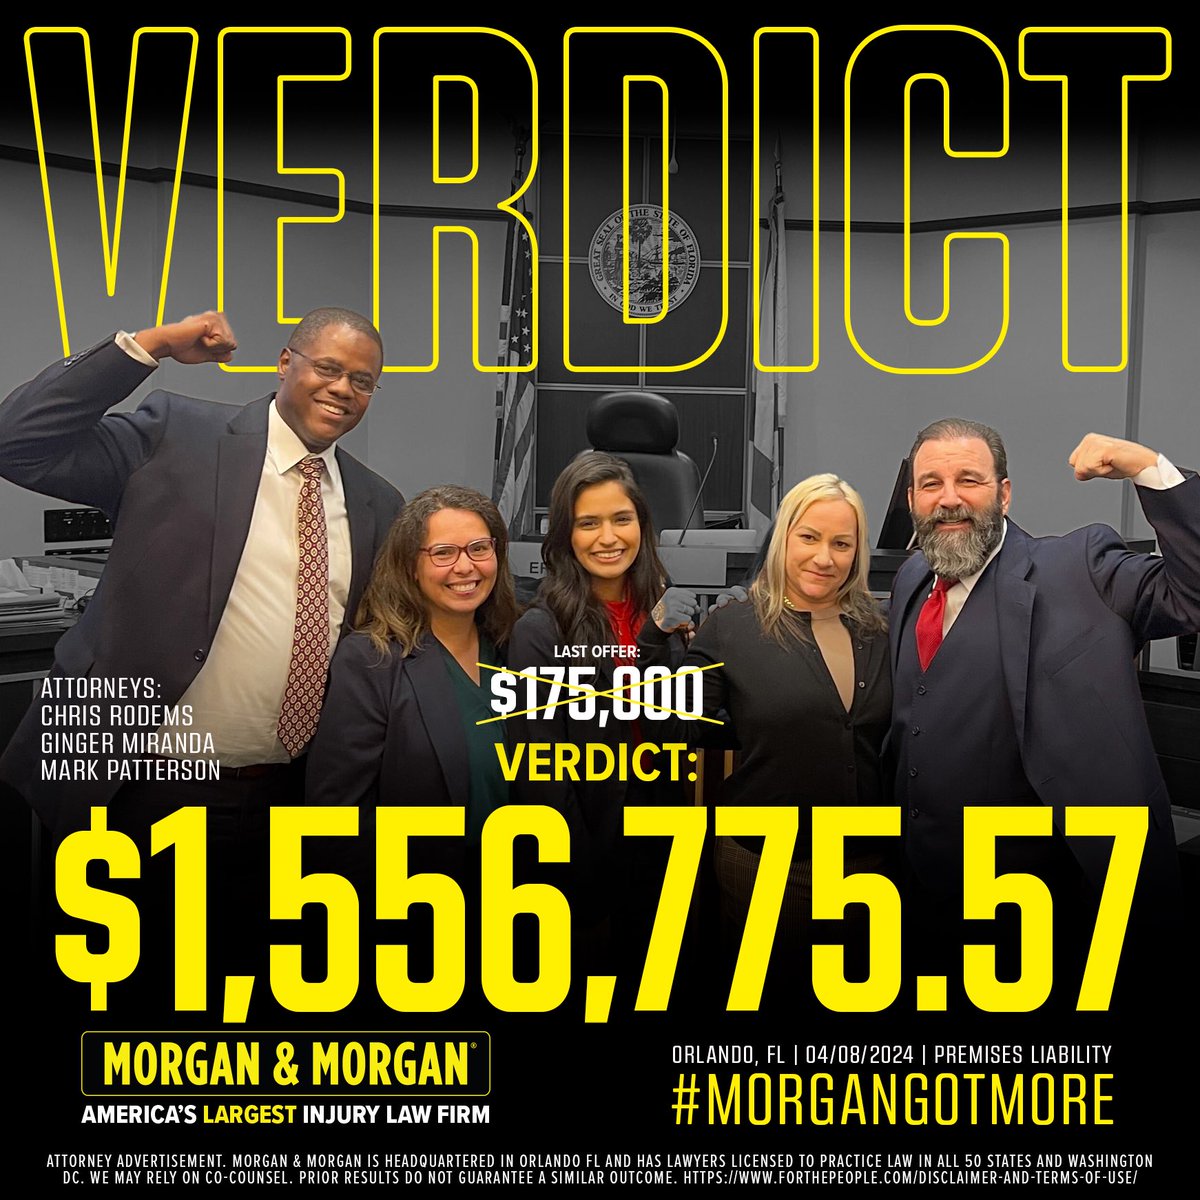 🚨#VerdictAlert: 

Chris Rodems, Ginger Miranda, and Mark Patterson just received a $1,556,775.57 verdict for our client in Orlando, FL!

Proud of this team for getting our client every penny they deserved.

#ForThePeople #MorganGotMore